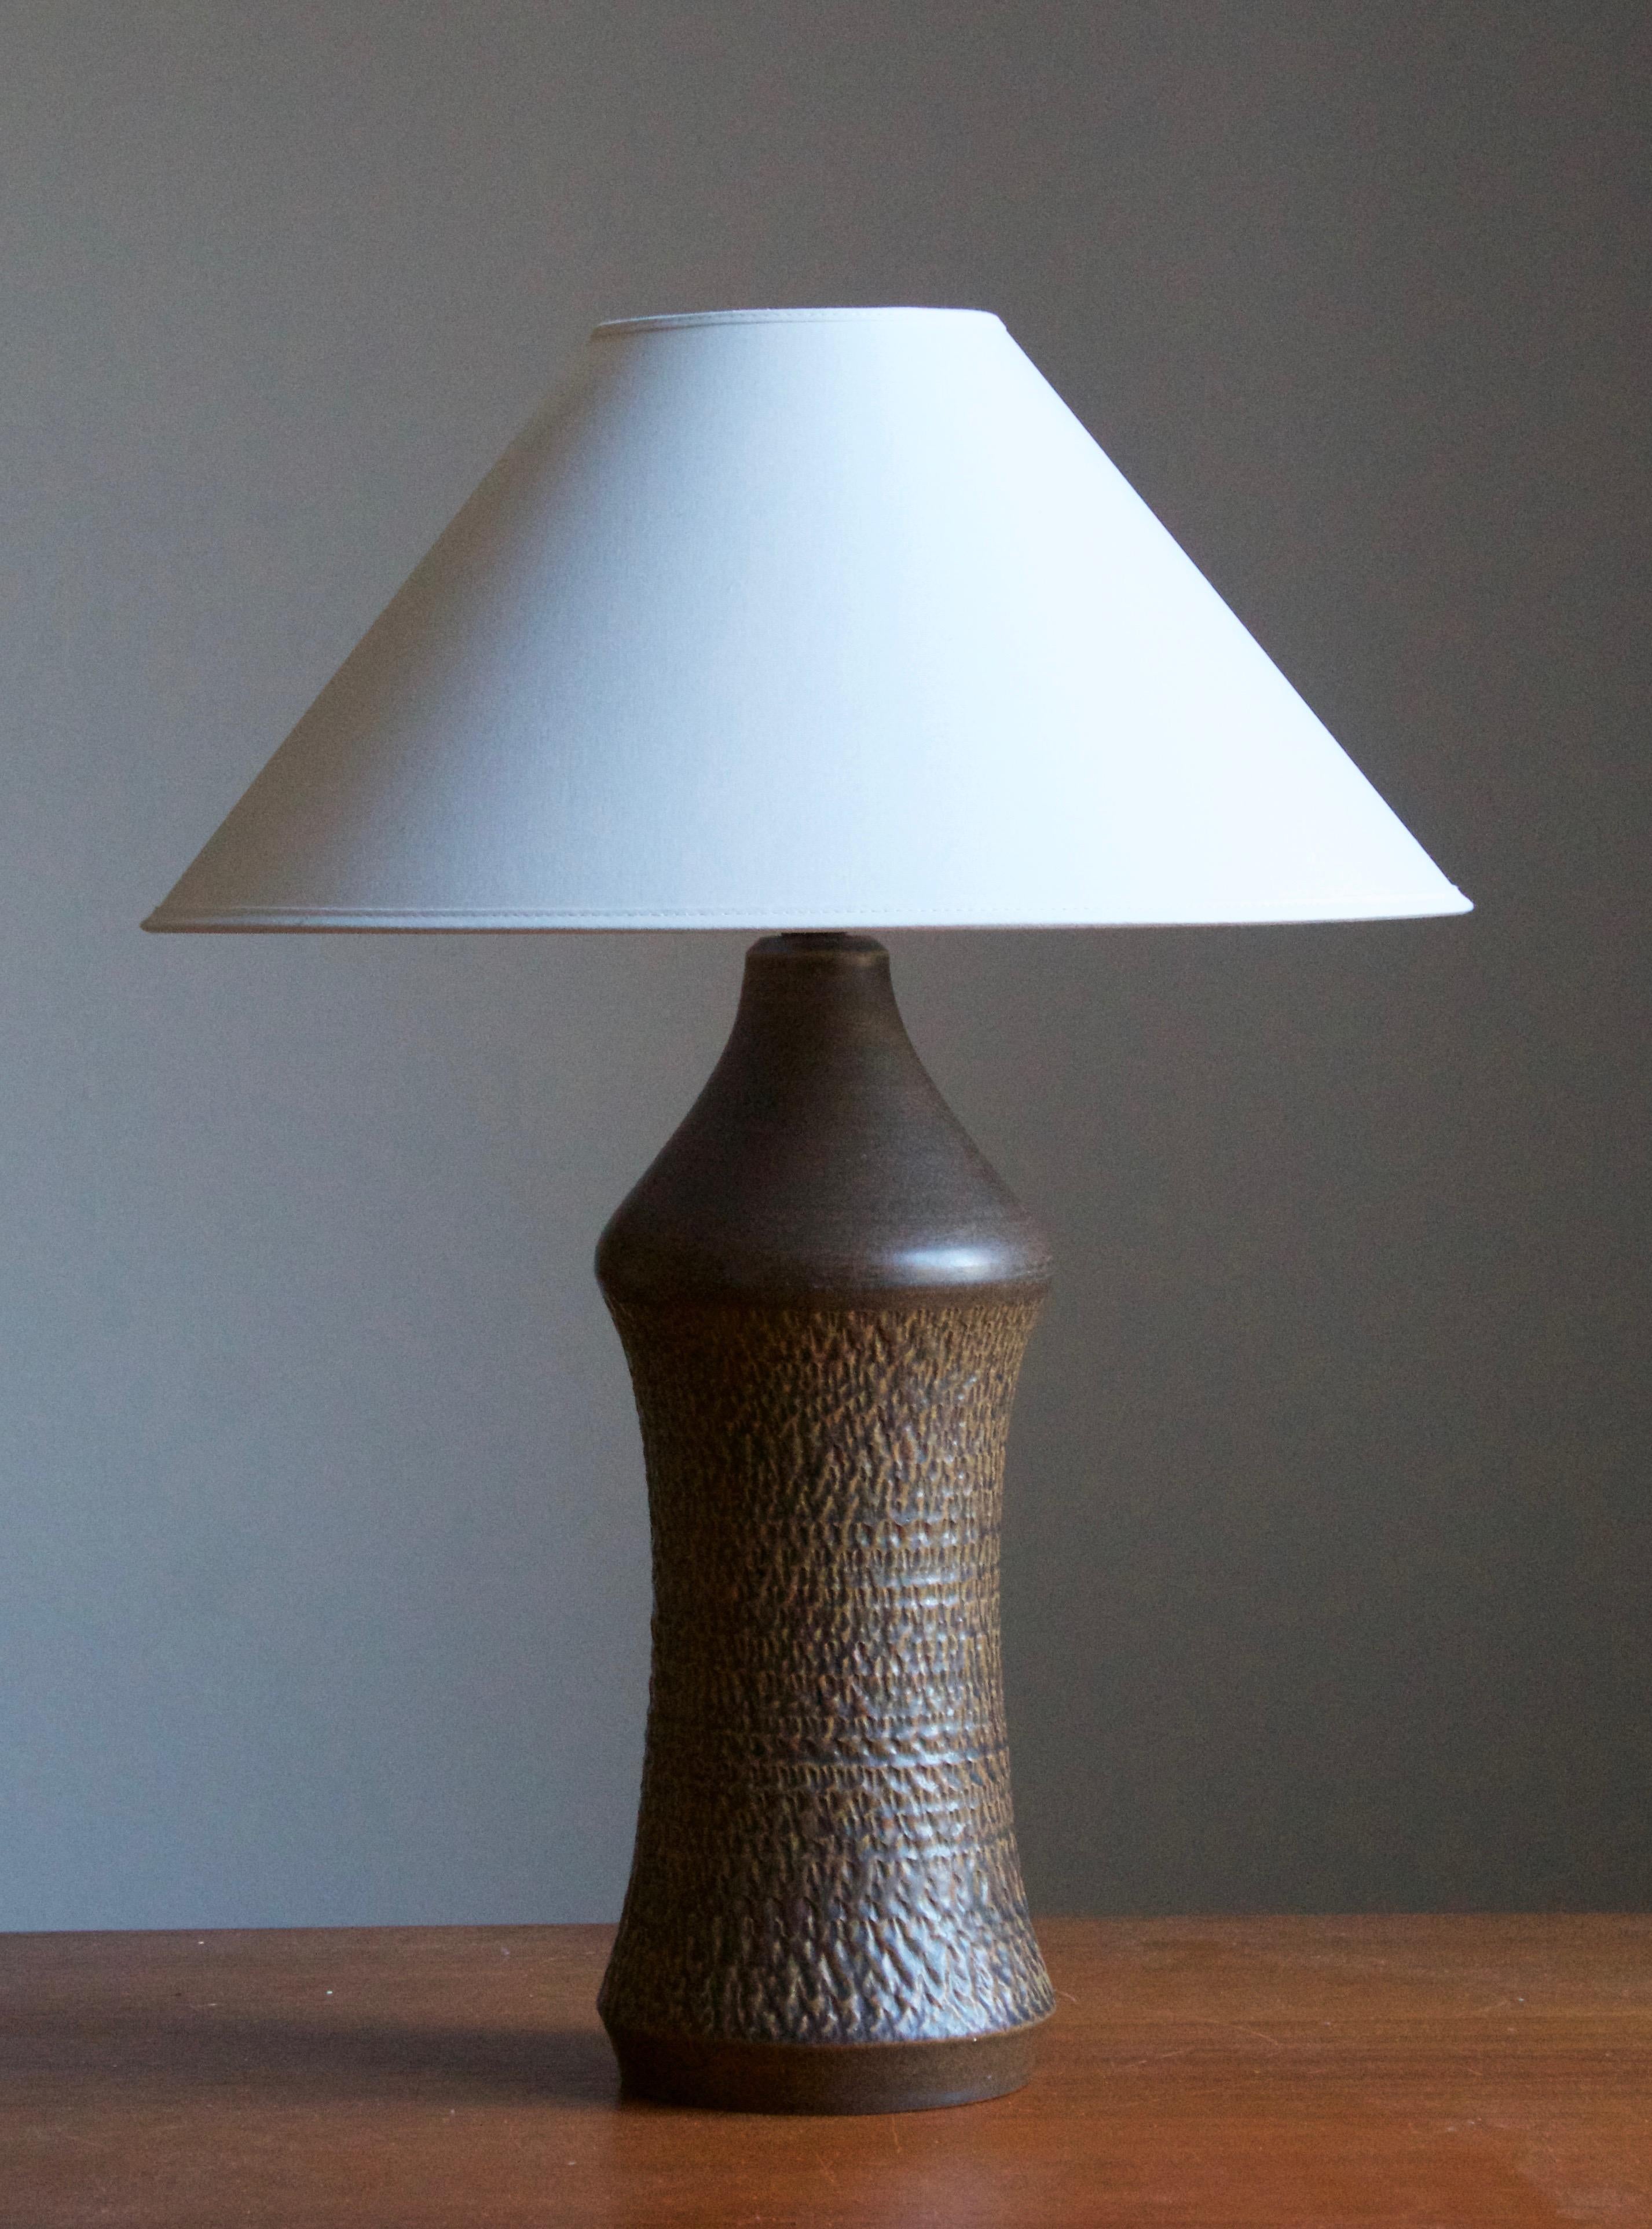 A sizable organic stoneware table lamp designed by Henry Brandi, and produced by his own firm, Brandi Vejbystrand, Sweden, 1960s. Marked and labeled. 

Sold without lampshade. Stated dimensions exclude lamsphade.

Other lighting designers of the